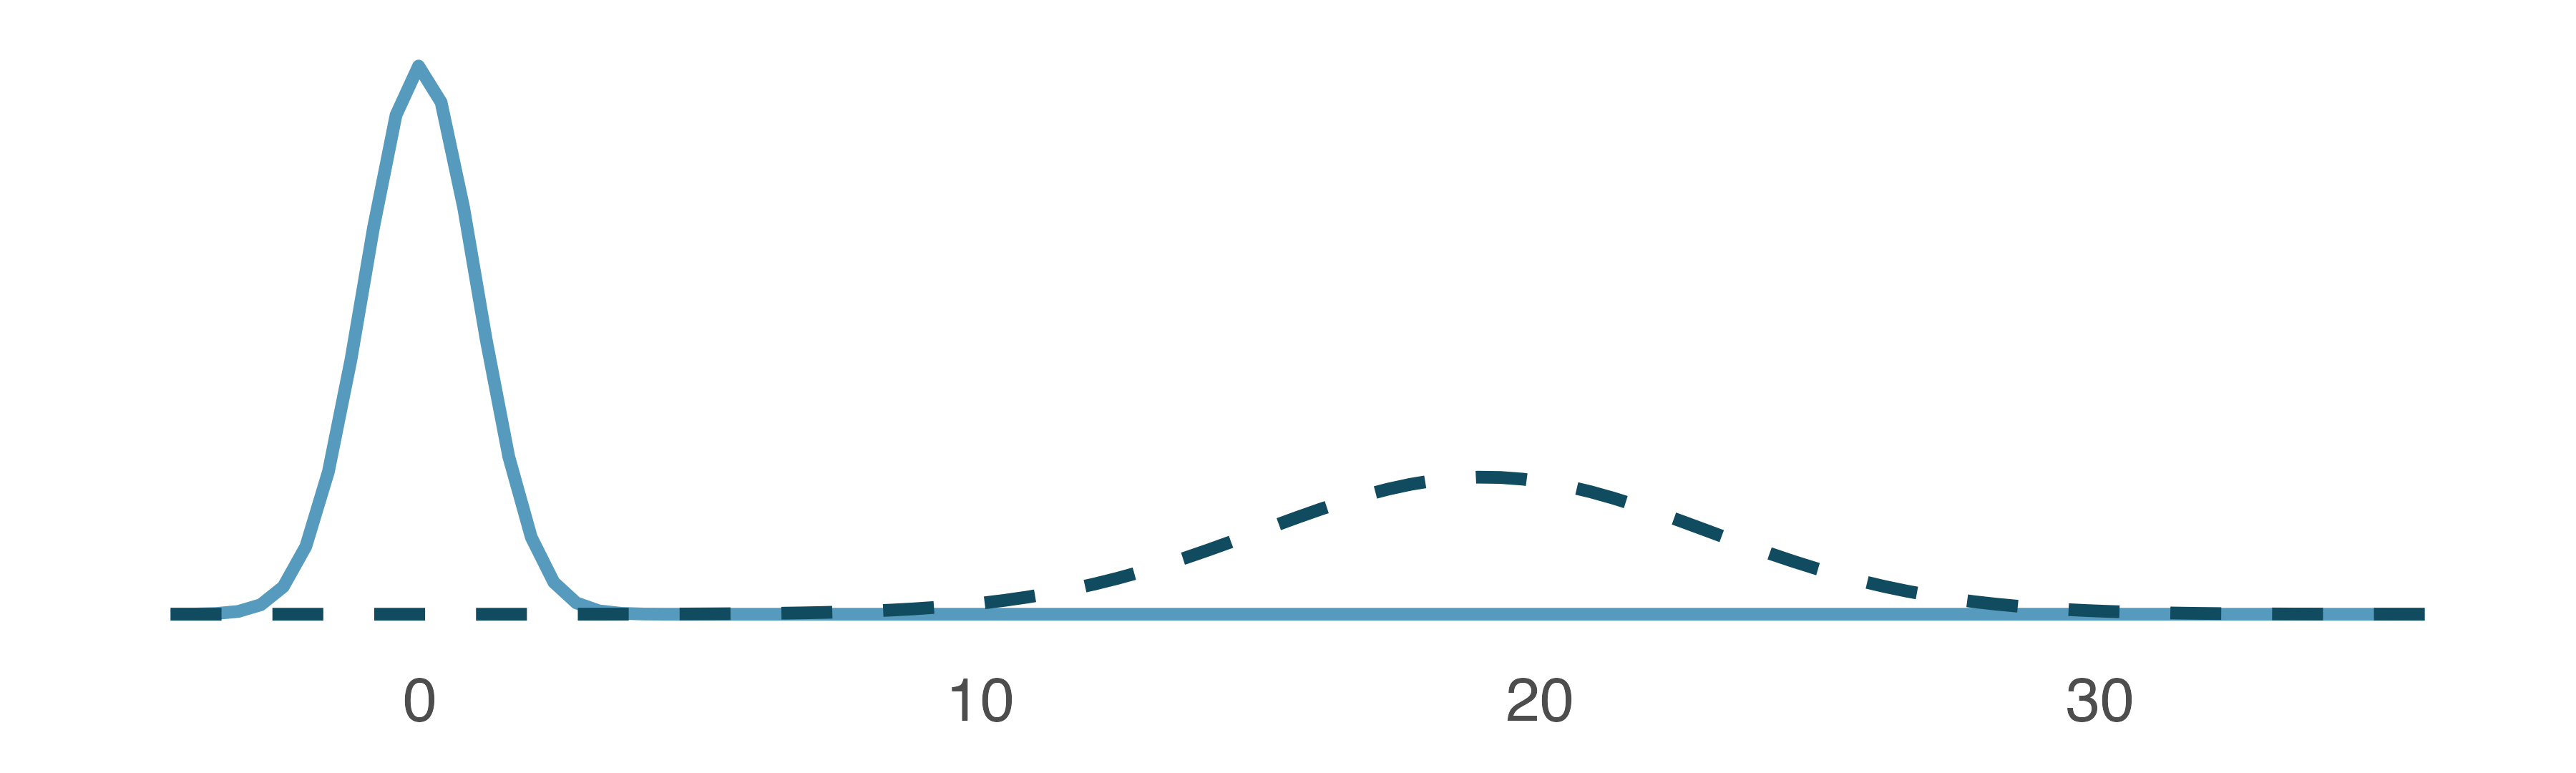 Two normal curves plotted on the same axis.  One is a standard normal curve with a mean at zero and a standard deviation of one.  The other has a mean of 19 with a standard deviation of four.